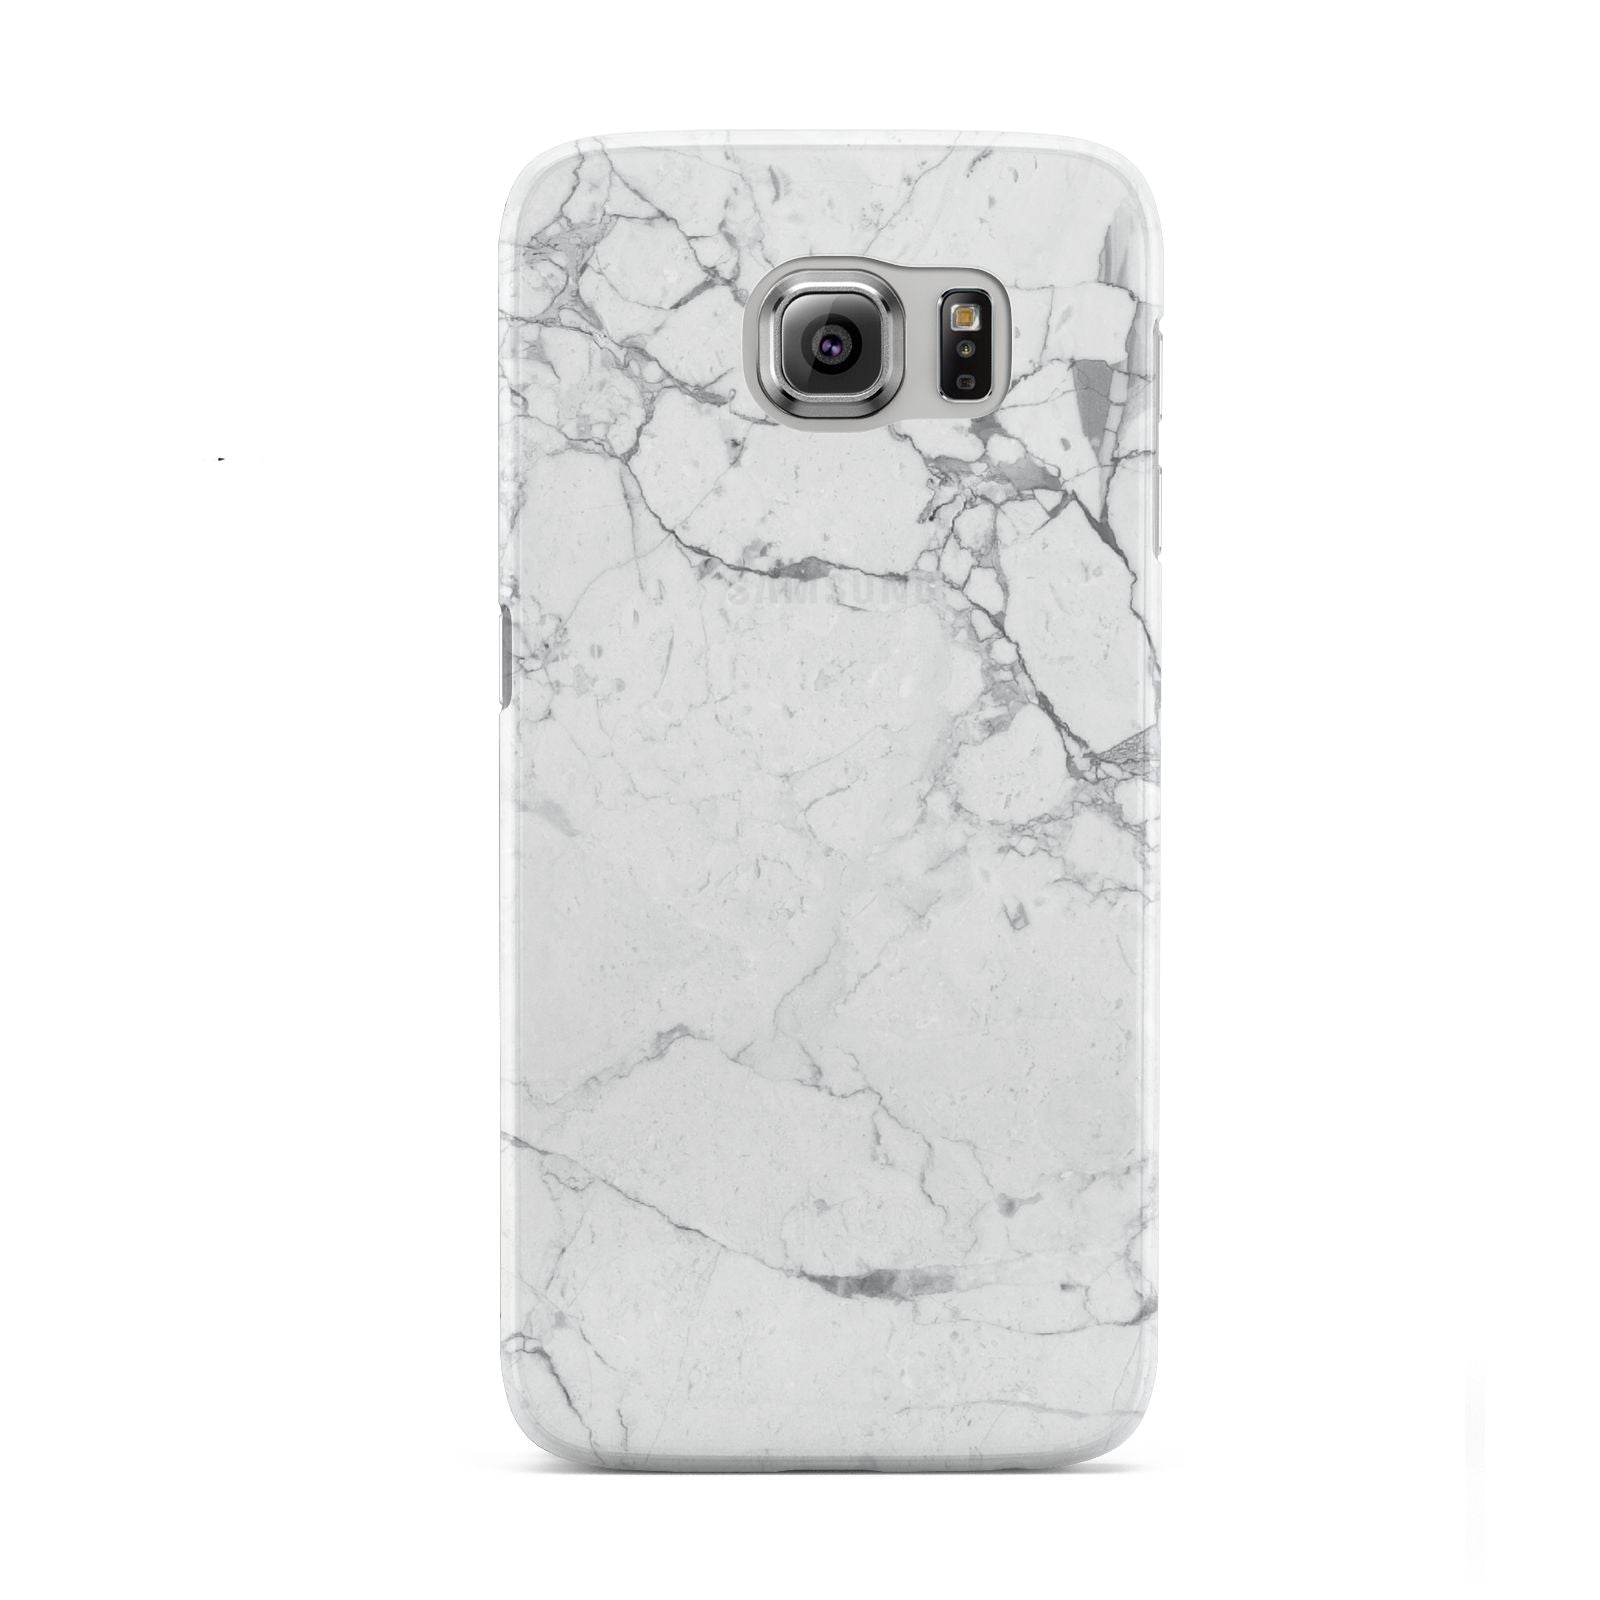 Faux Marble Effect Grey White Samsung Galaxy S6 Case